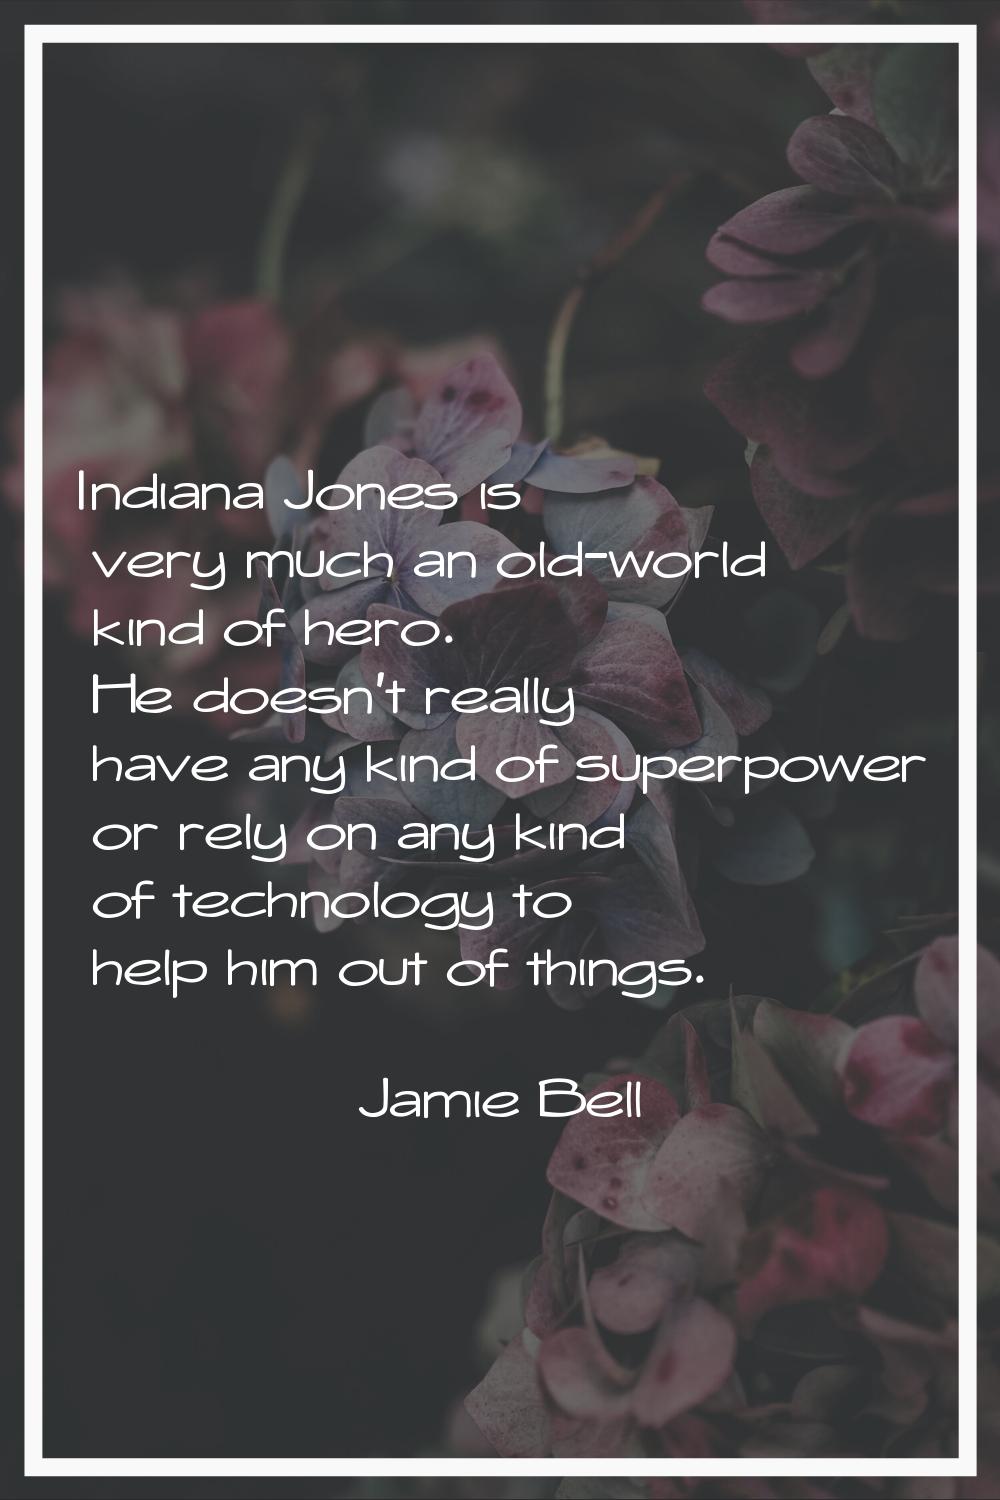 Indiana Jones is very much an old-world kind of hero. He doesn't really have any kind of superpower